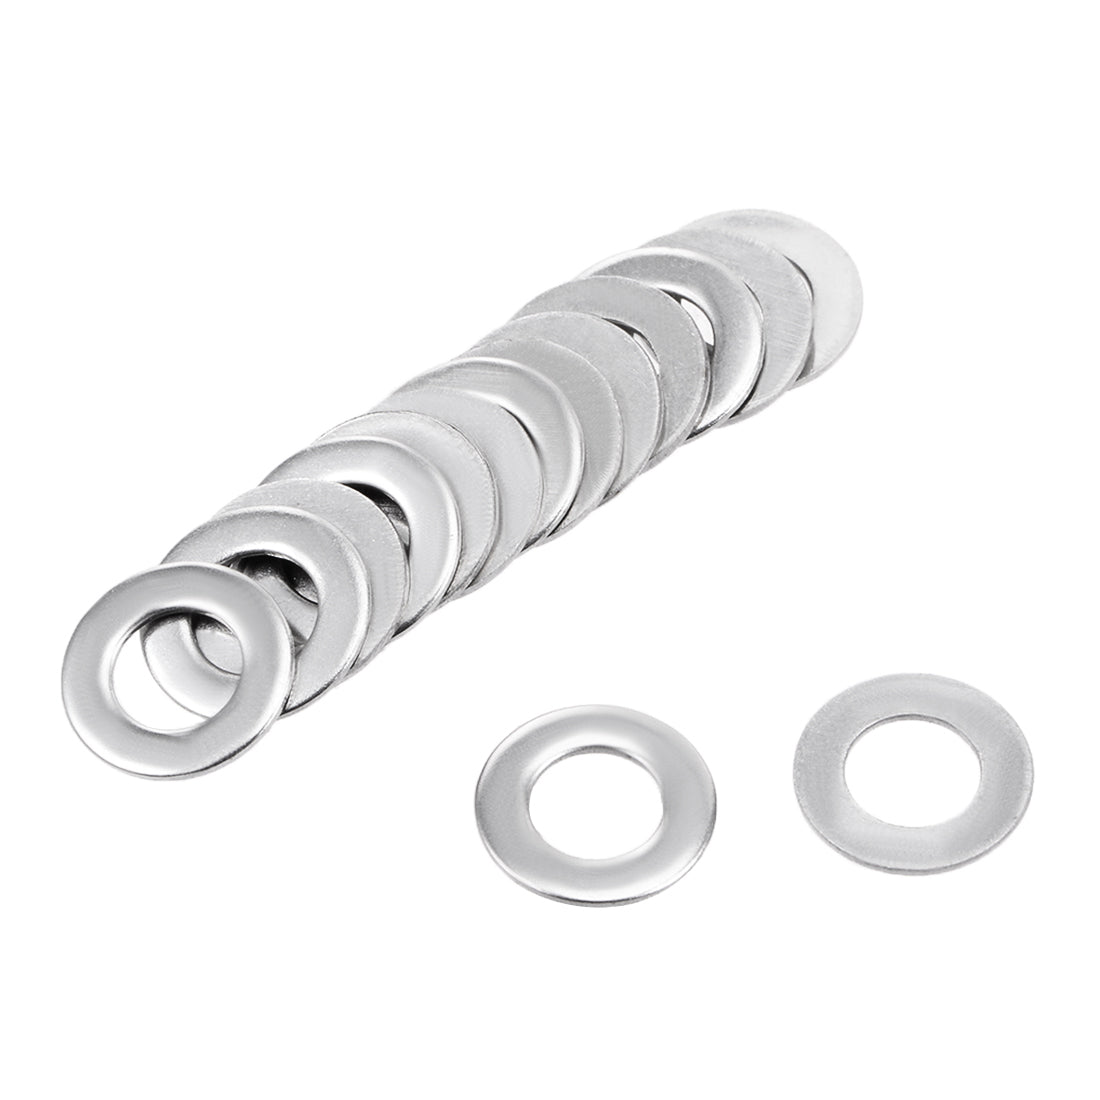 uxcell Uxcell 50 Pcs 4mm x 8mm x 0.9mm 304 Stainless Steel Flat Washer for Screw Bolt